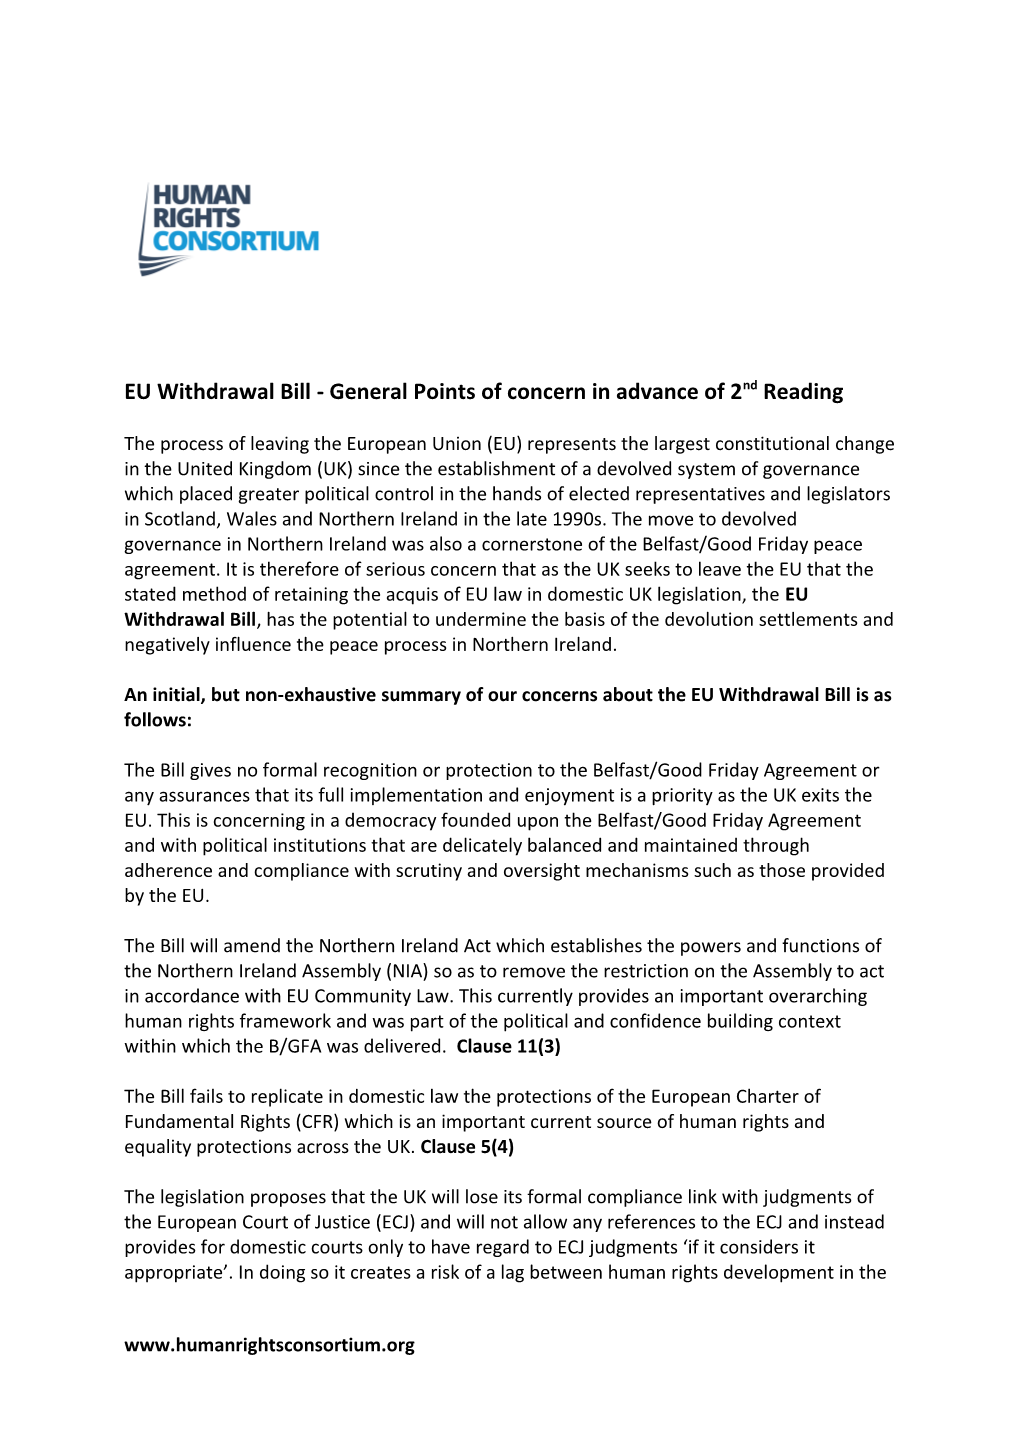 EU Withdrawal Bill - General Points of Concern in Advance of 2Nd Reading